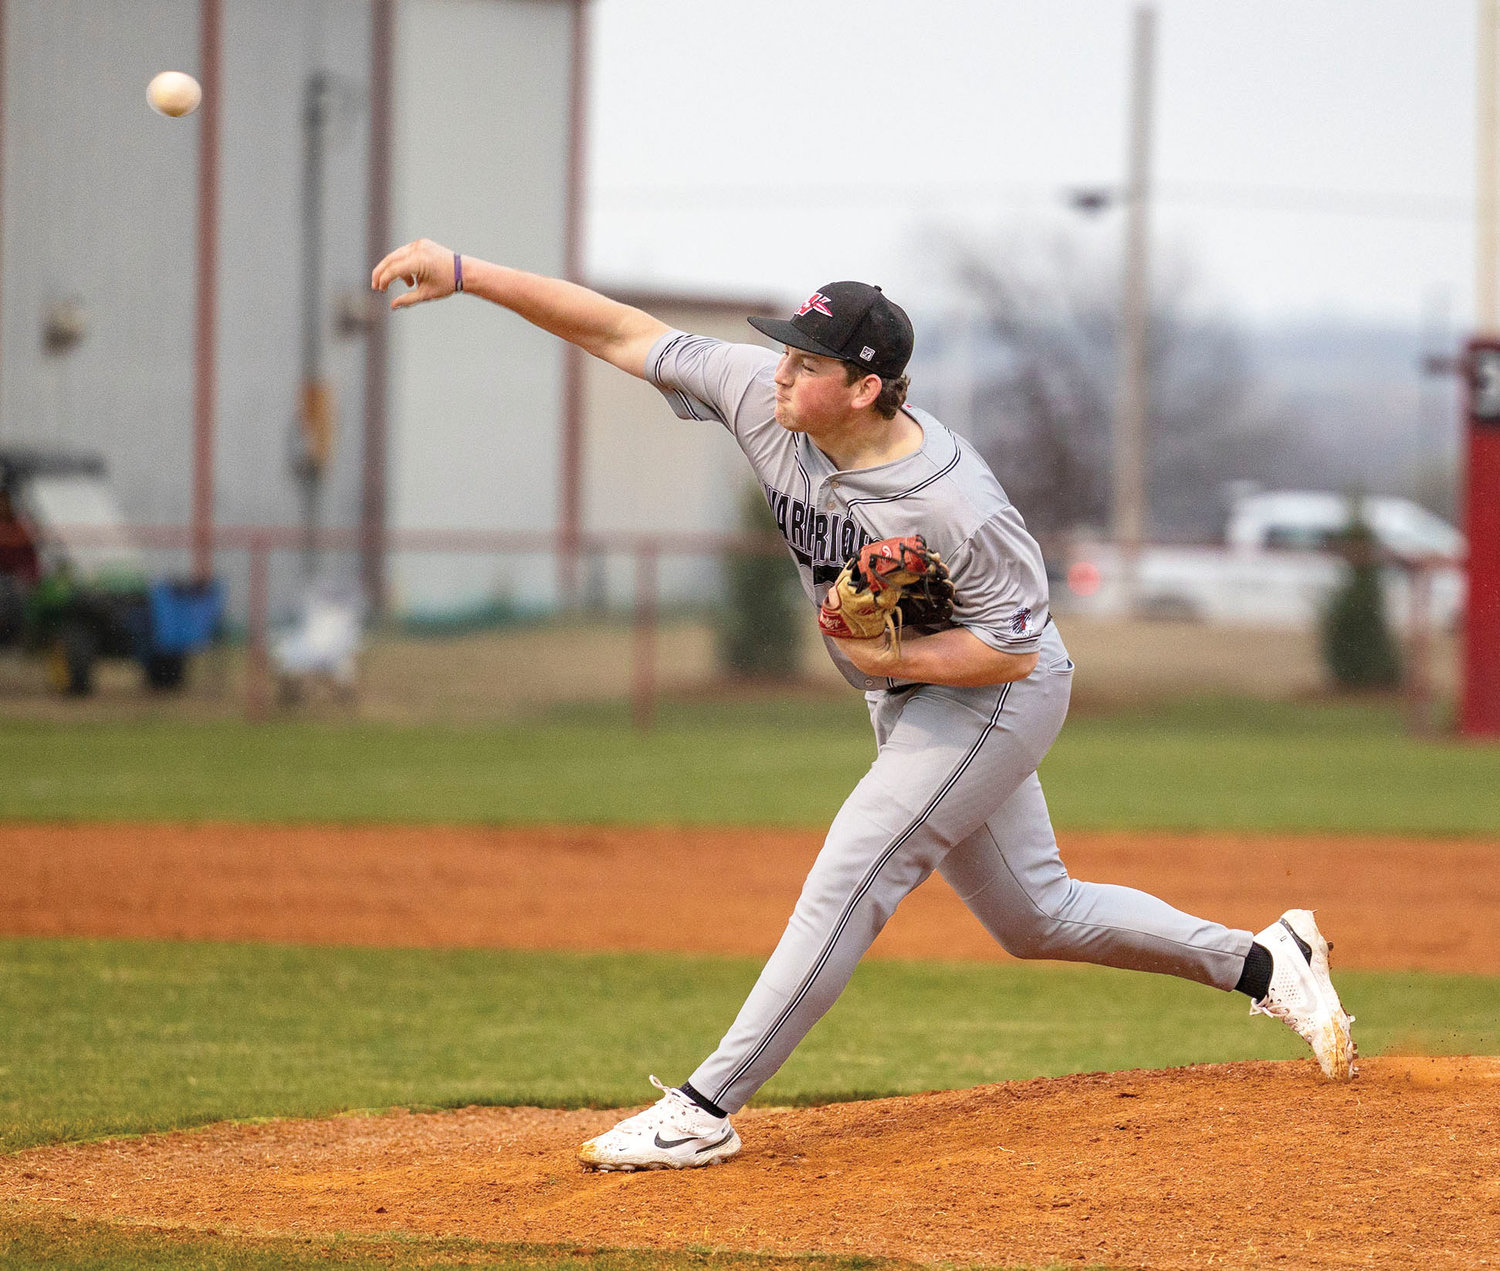 Washington senior Jake Wells lets a pitch go during a recent baseball game. Wells and his Warrior teammates were in Gulf Shores over Spring Break. They went 5-1 in the Gulf Coast Classic, losing in the Championship game to Tuscaloosa County High School.